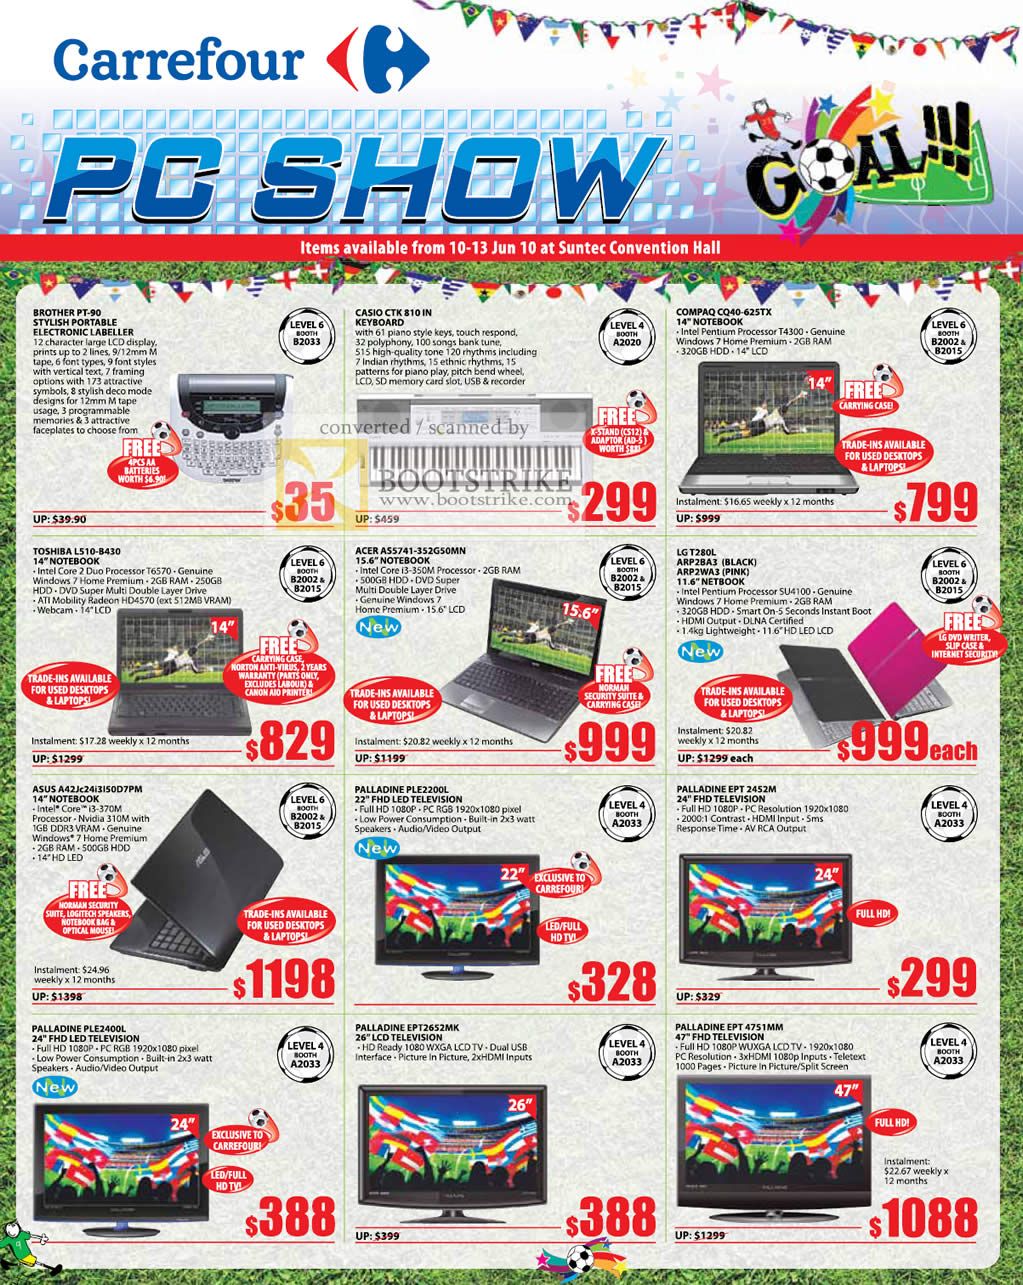 PC Show 2010 price list image brochure of Carrefour Brother Portable Labeller Casio Keyboard Compaq Notebook Toshiba Acer LG ASUS Palladine LCD TV